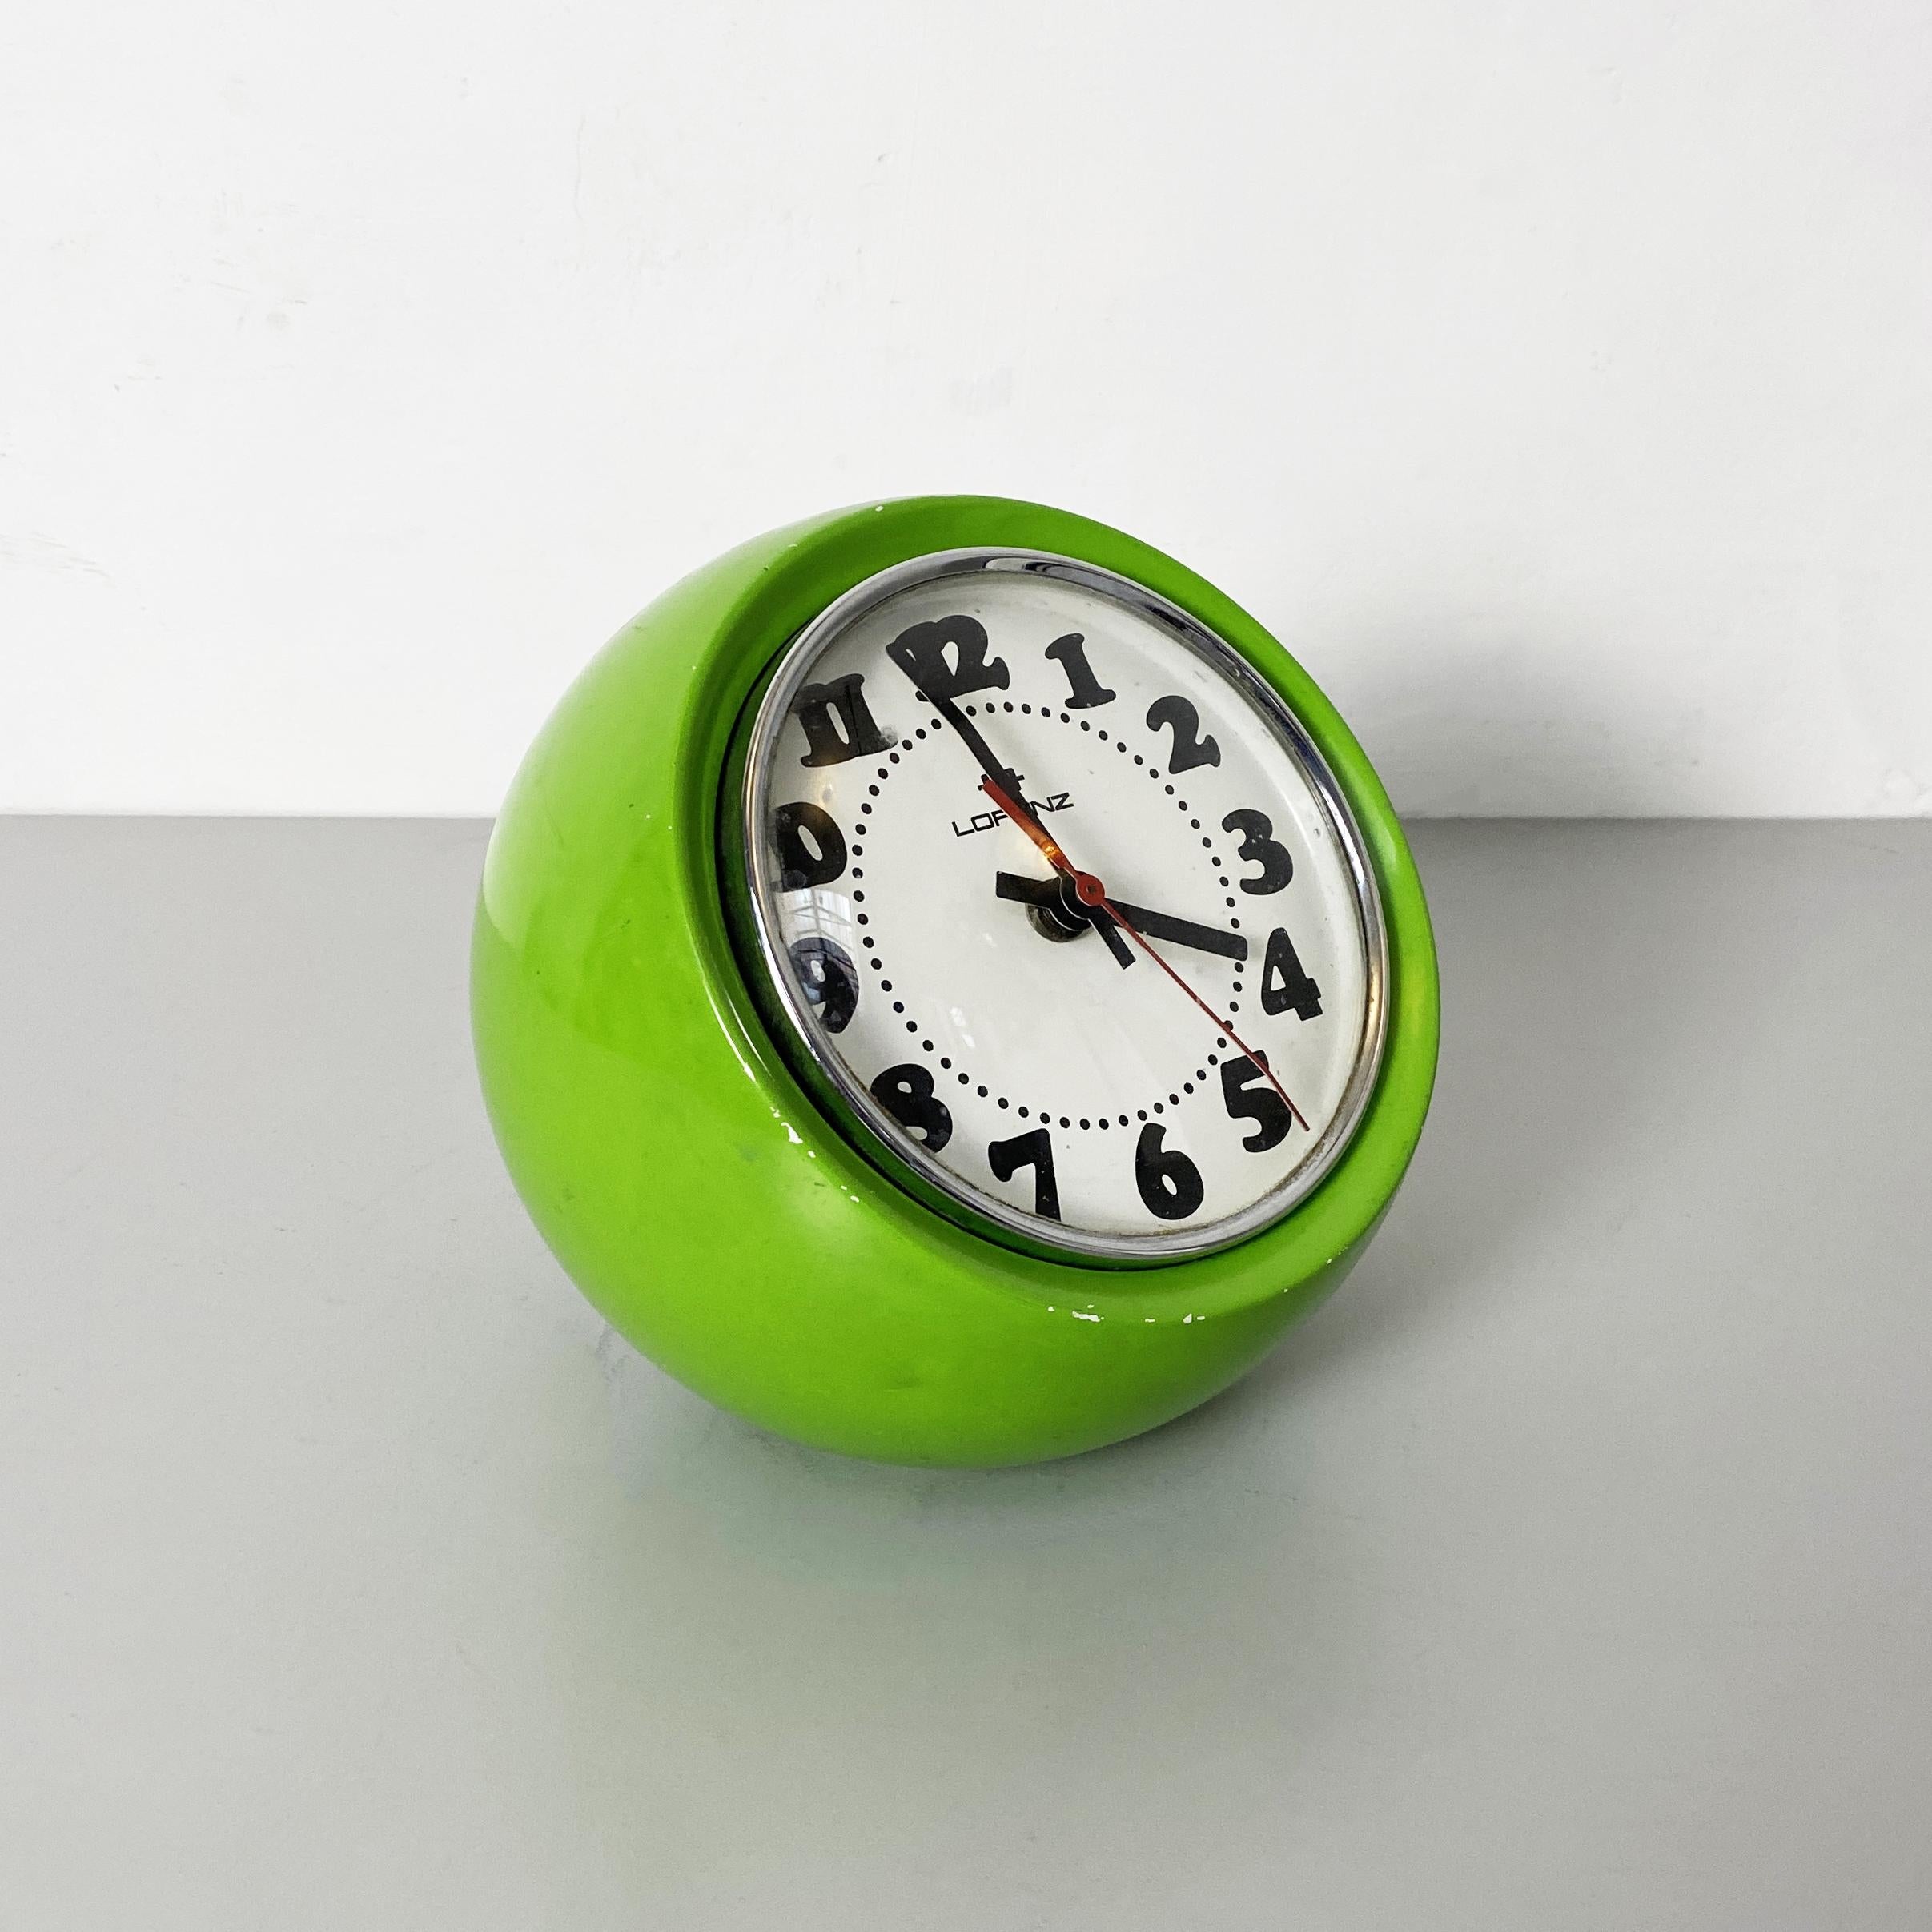 Italian mid-century Spherical plastic green table clock model Boule by Lorenz, 1960s
Boule model table clock, the structure is in spherical shape in metal and plastic. The dial is removable and positioned at an angle to improve readability.
Made